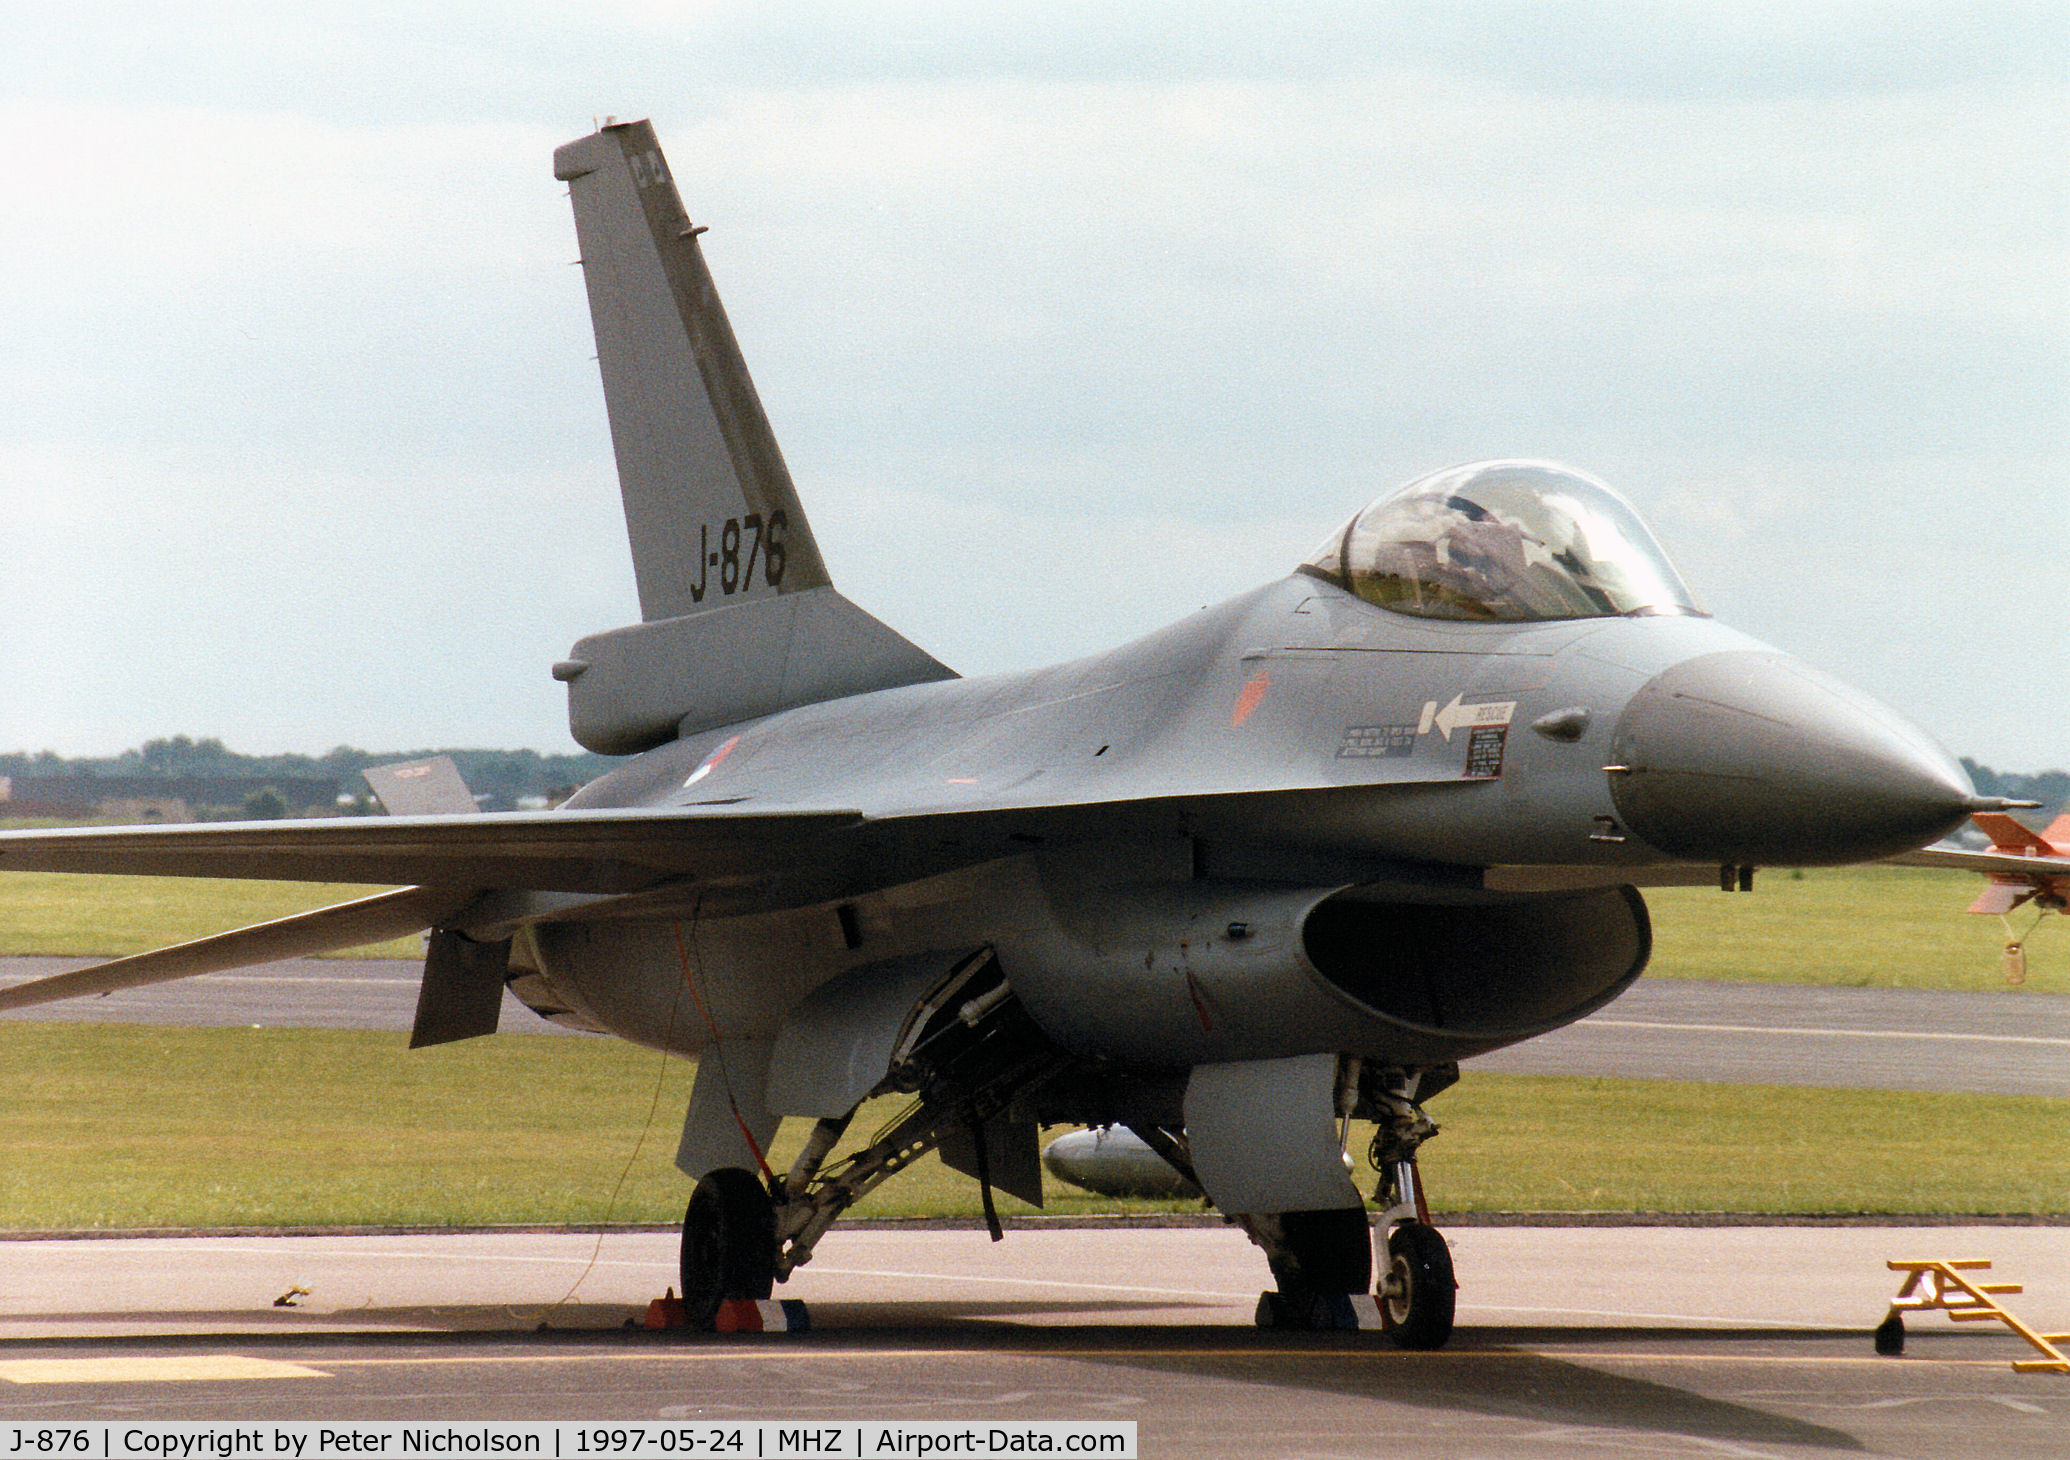 J-876, Fokker F-16AM Fighting Falcon C/N 6D-93, F-16A Falcon, callsign Orange, of 323 Squadron Royal Netherlands Air Force on the flight-line at the 1997 RAF Mildenhall Air Fete.